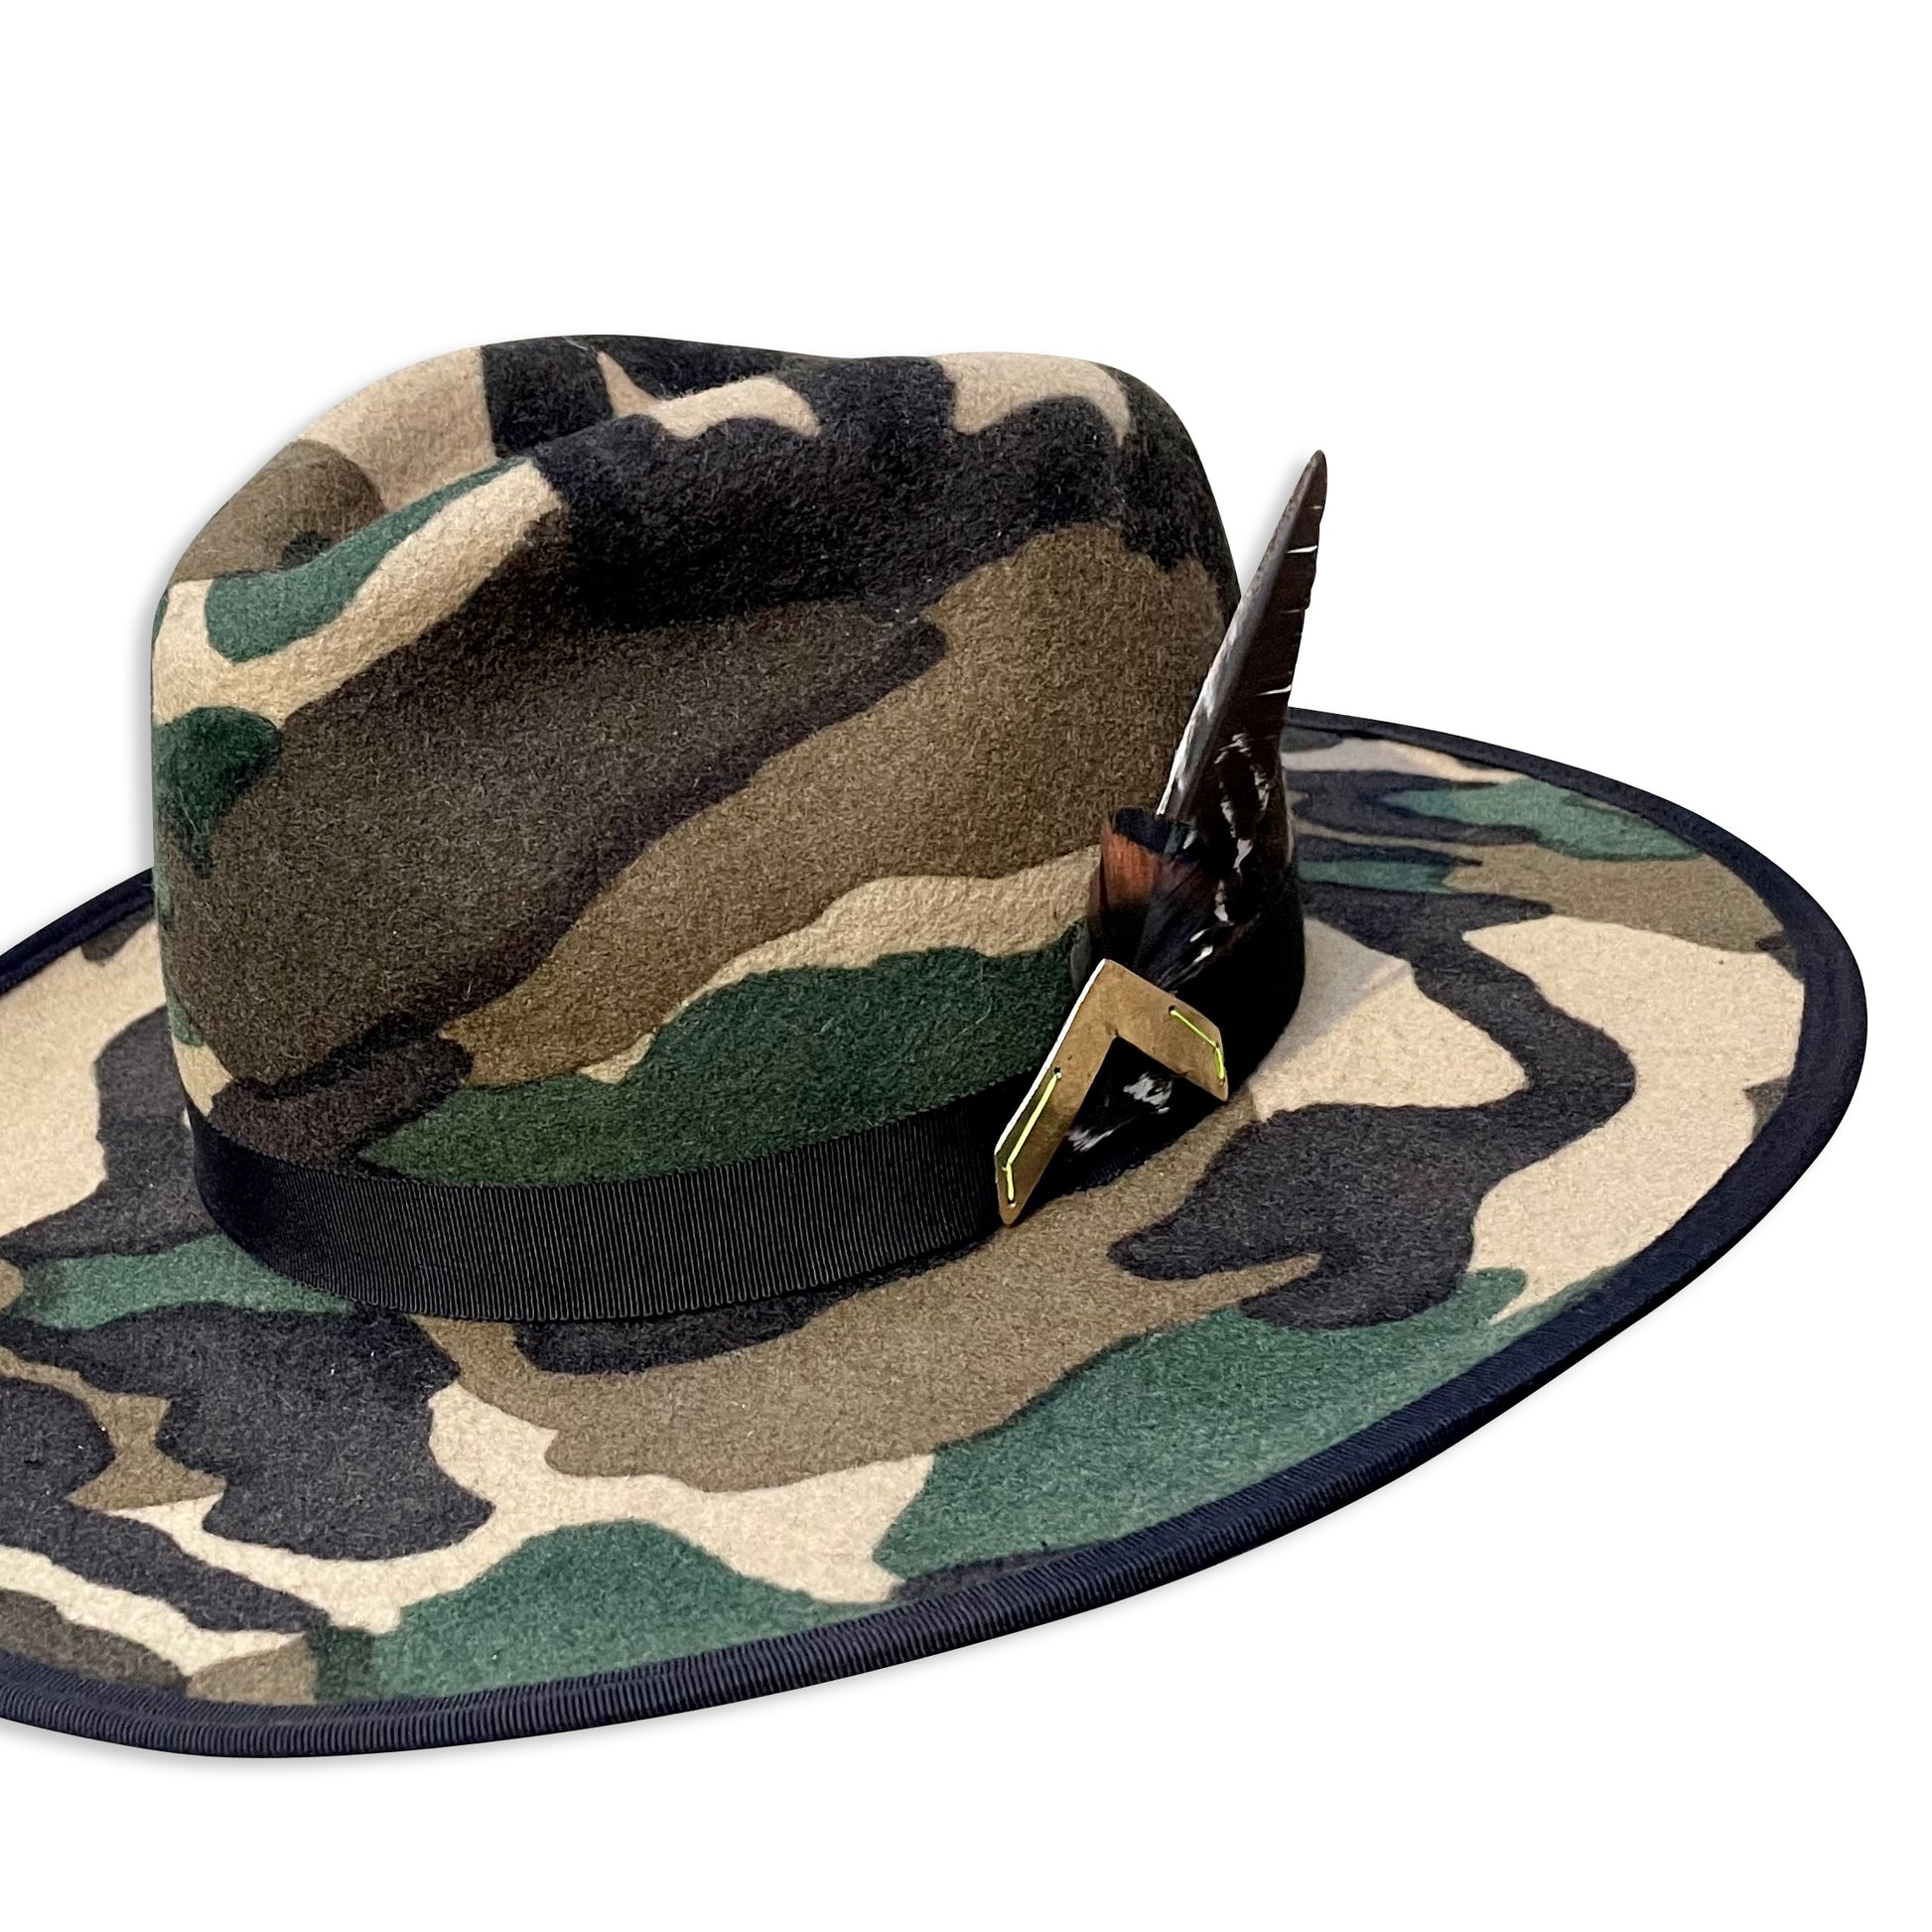 Camo Cowboy Wool Felt Hat from Cha Cha's House Hat Store in Manhattan